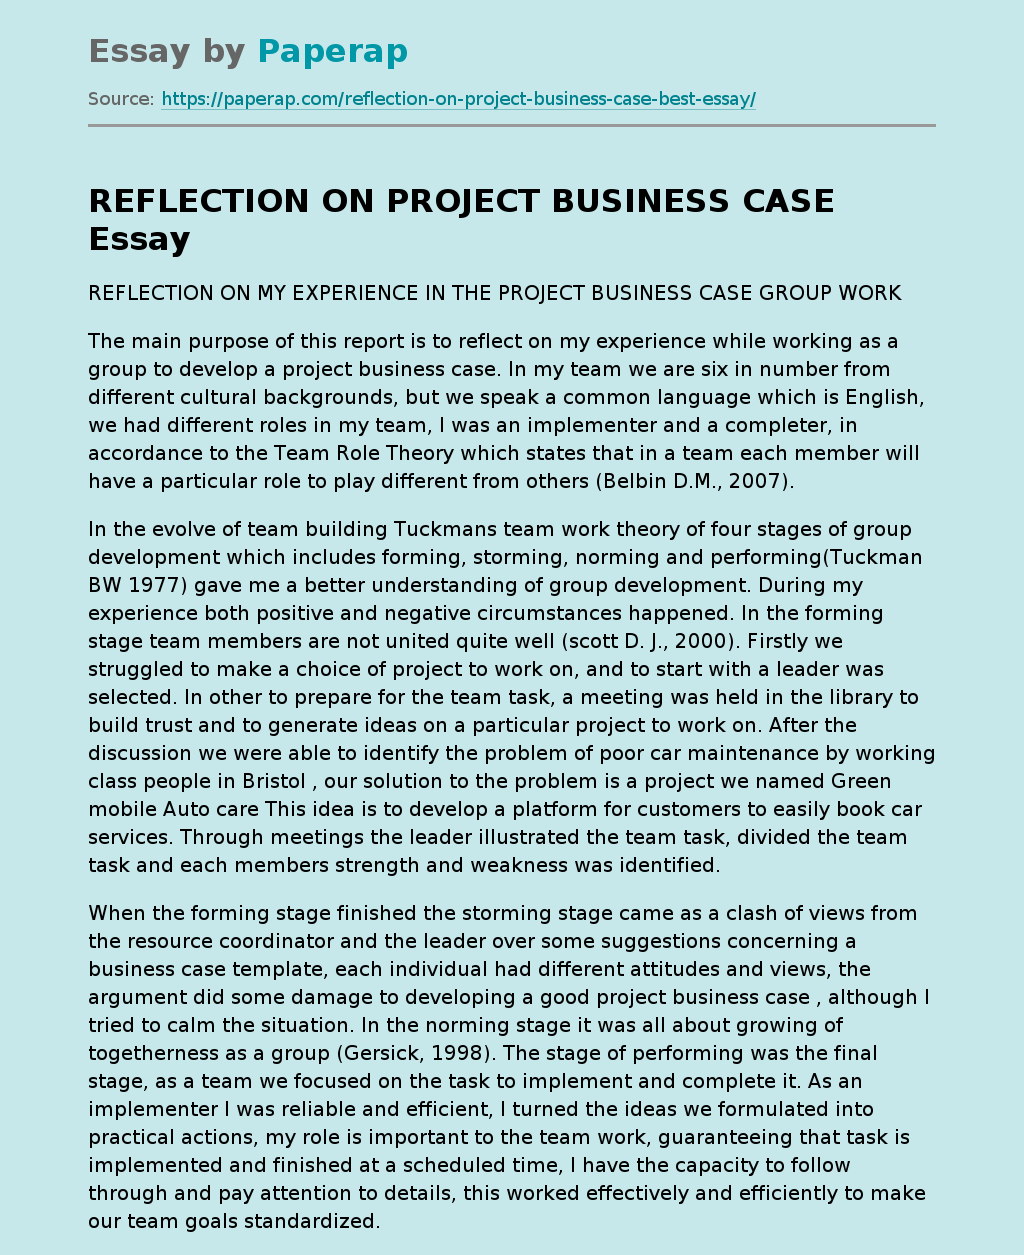 REFLECTION ON PROJECT BUSINESS CASE